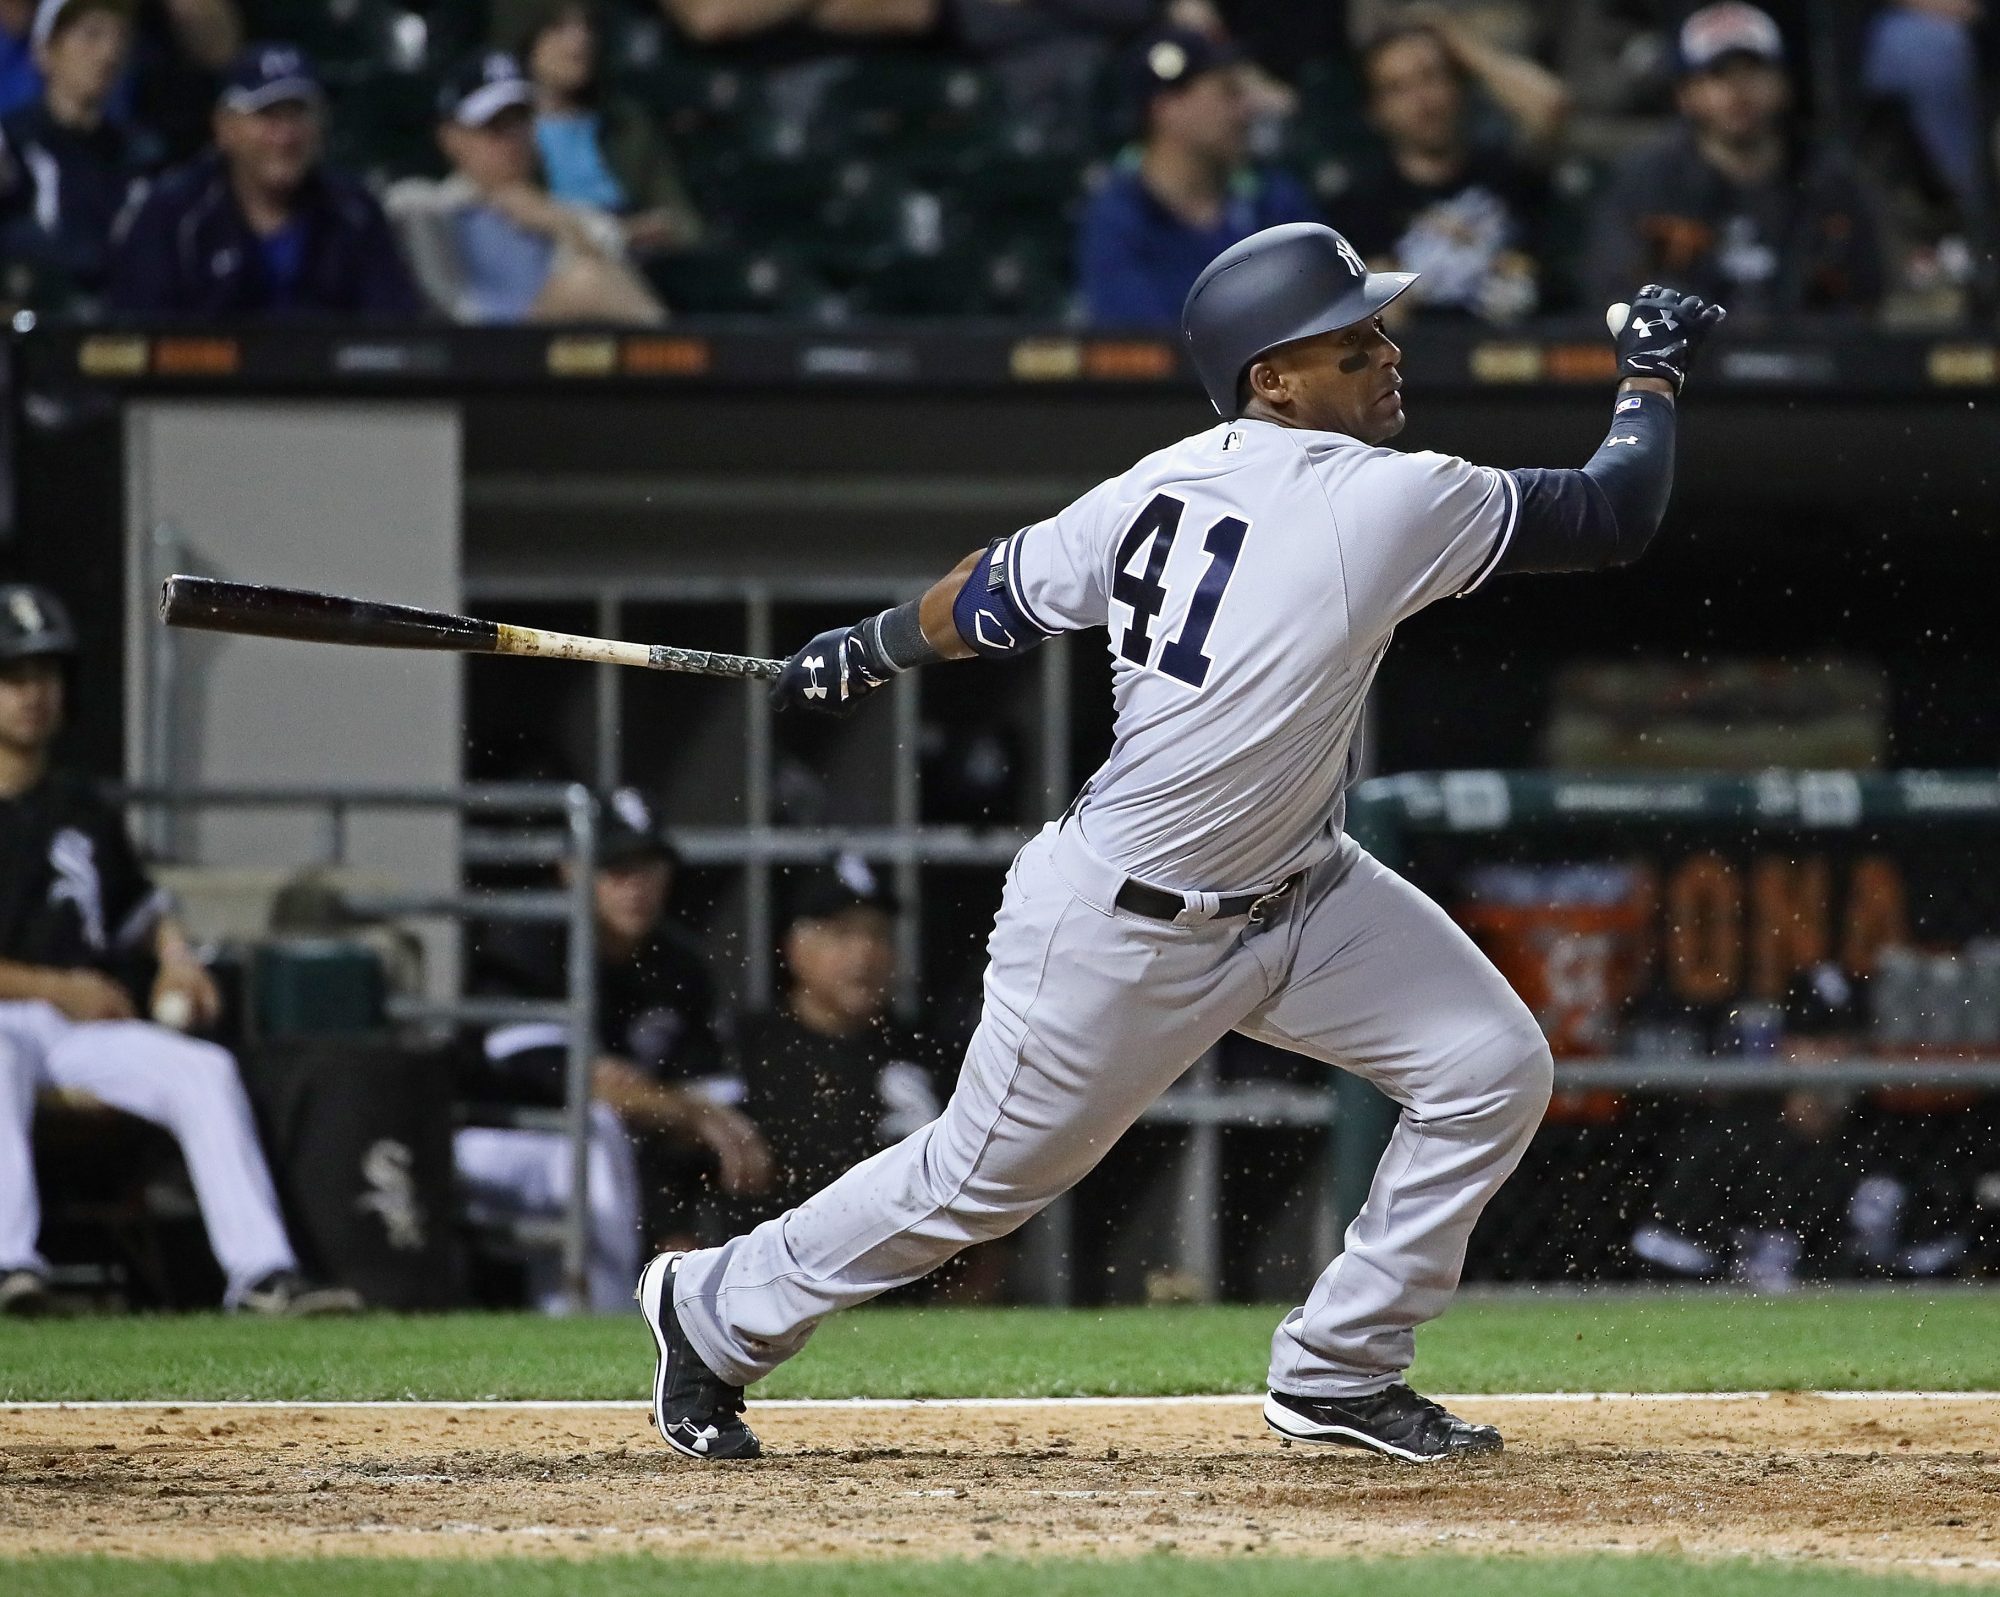 Miguel Andujar is Emerging as Arguably the Top Prospect in the New York Yankees System 1